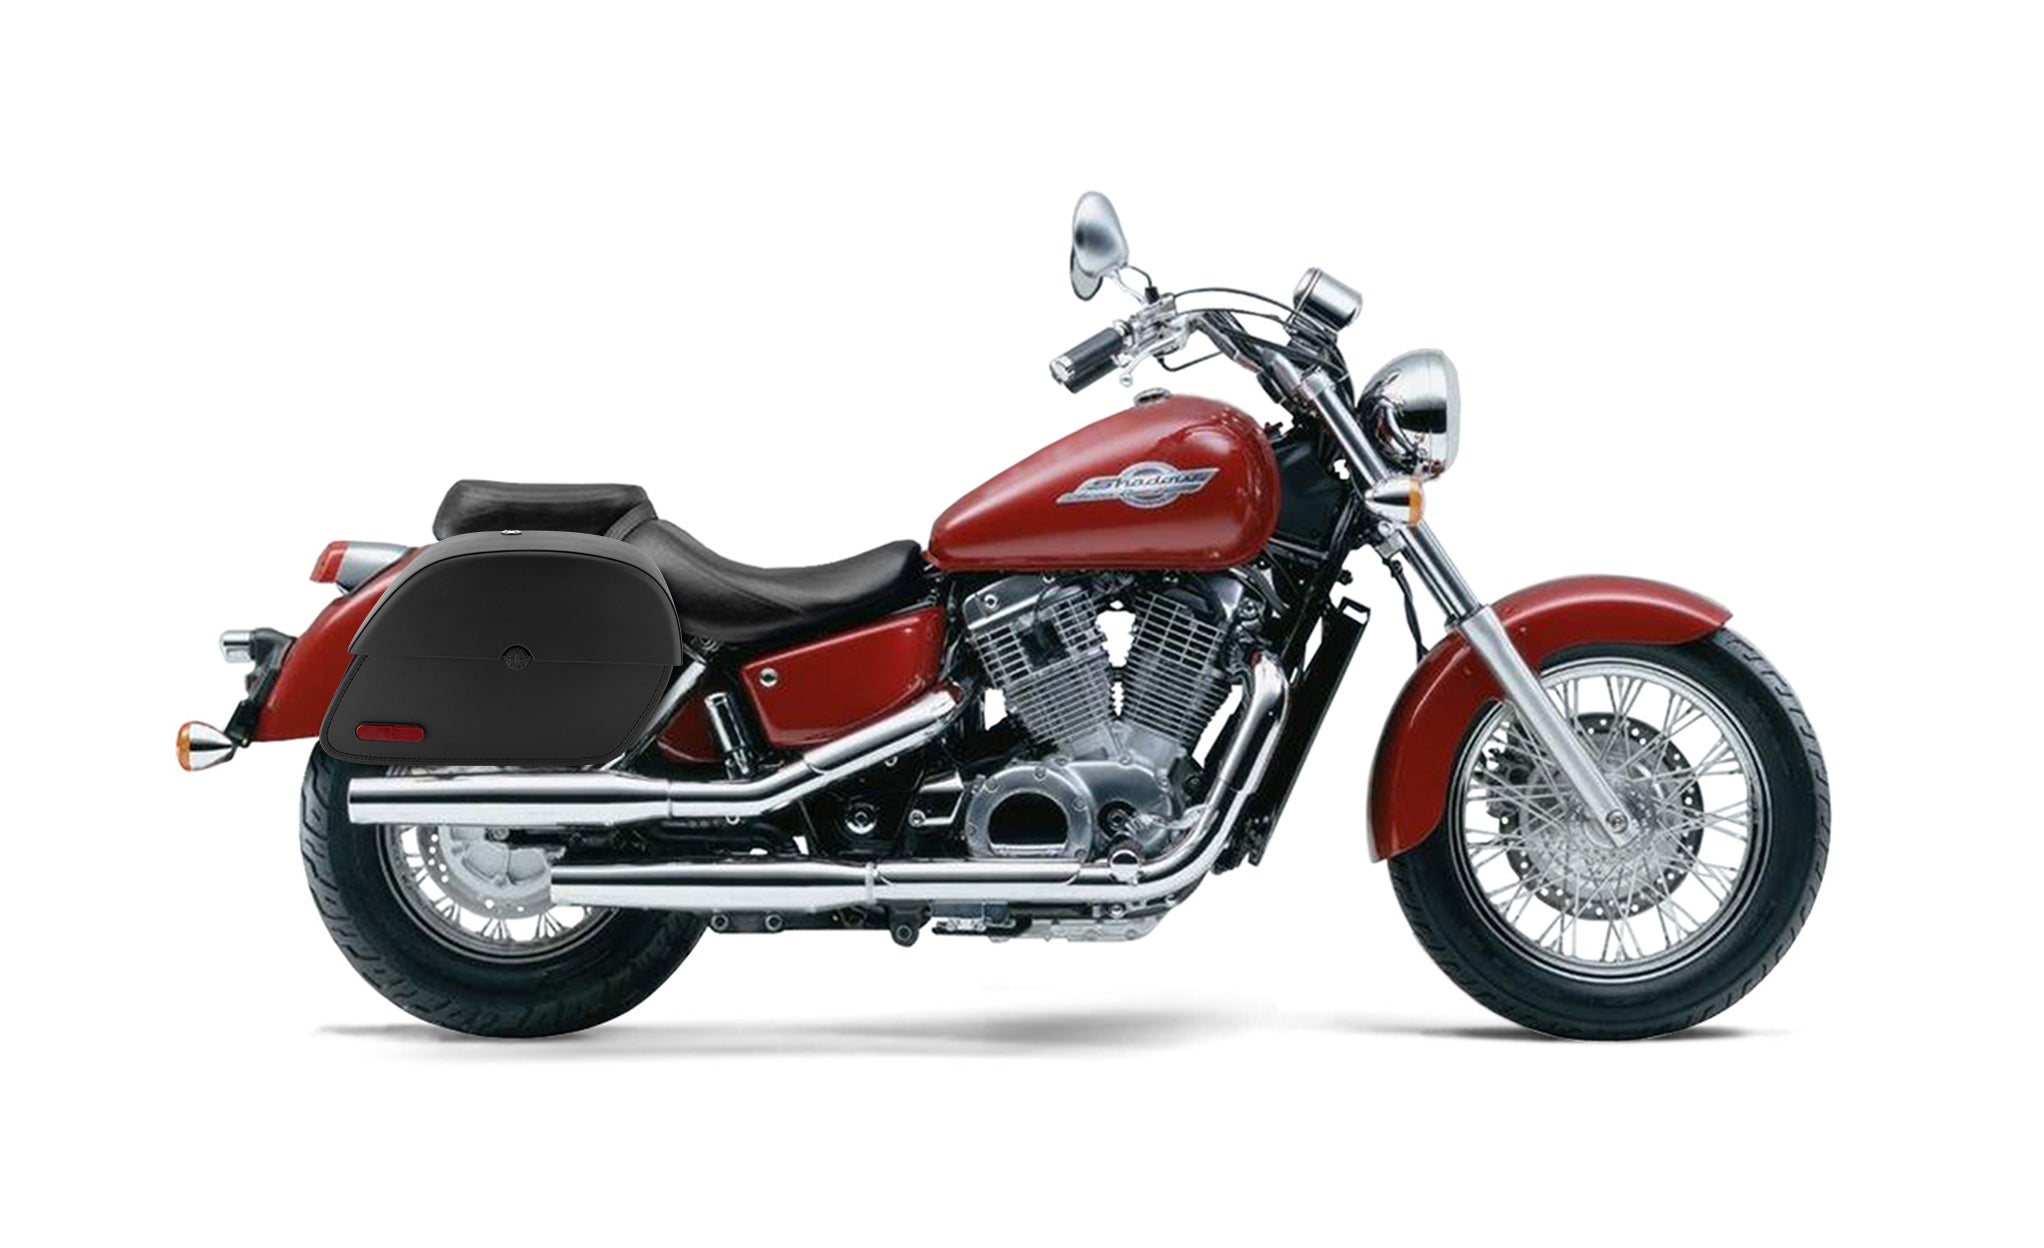 Viking Panzer Medium Honda Shadow 1100 Ace Leather Motorcycle Saddlebags Engineering Excellence with Bag on Bike @expand